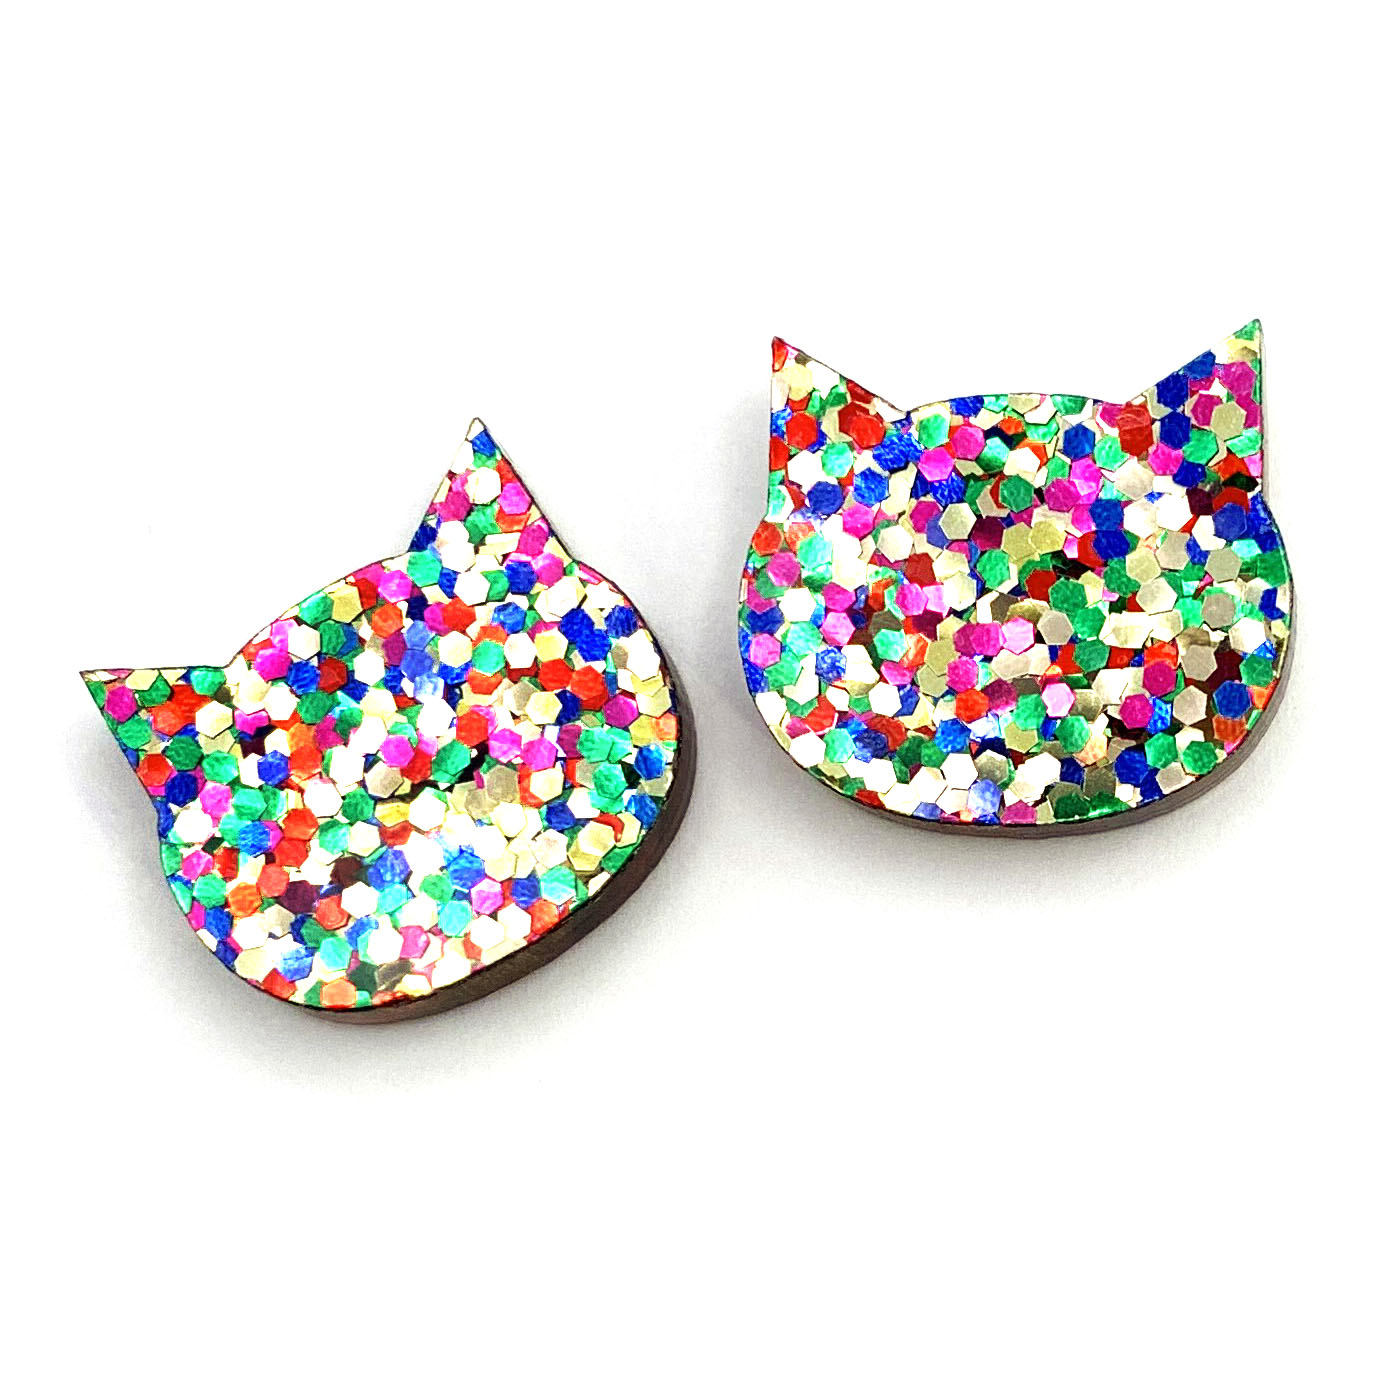 Cat Stud · Extra Large · Choose Your Colour